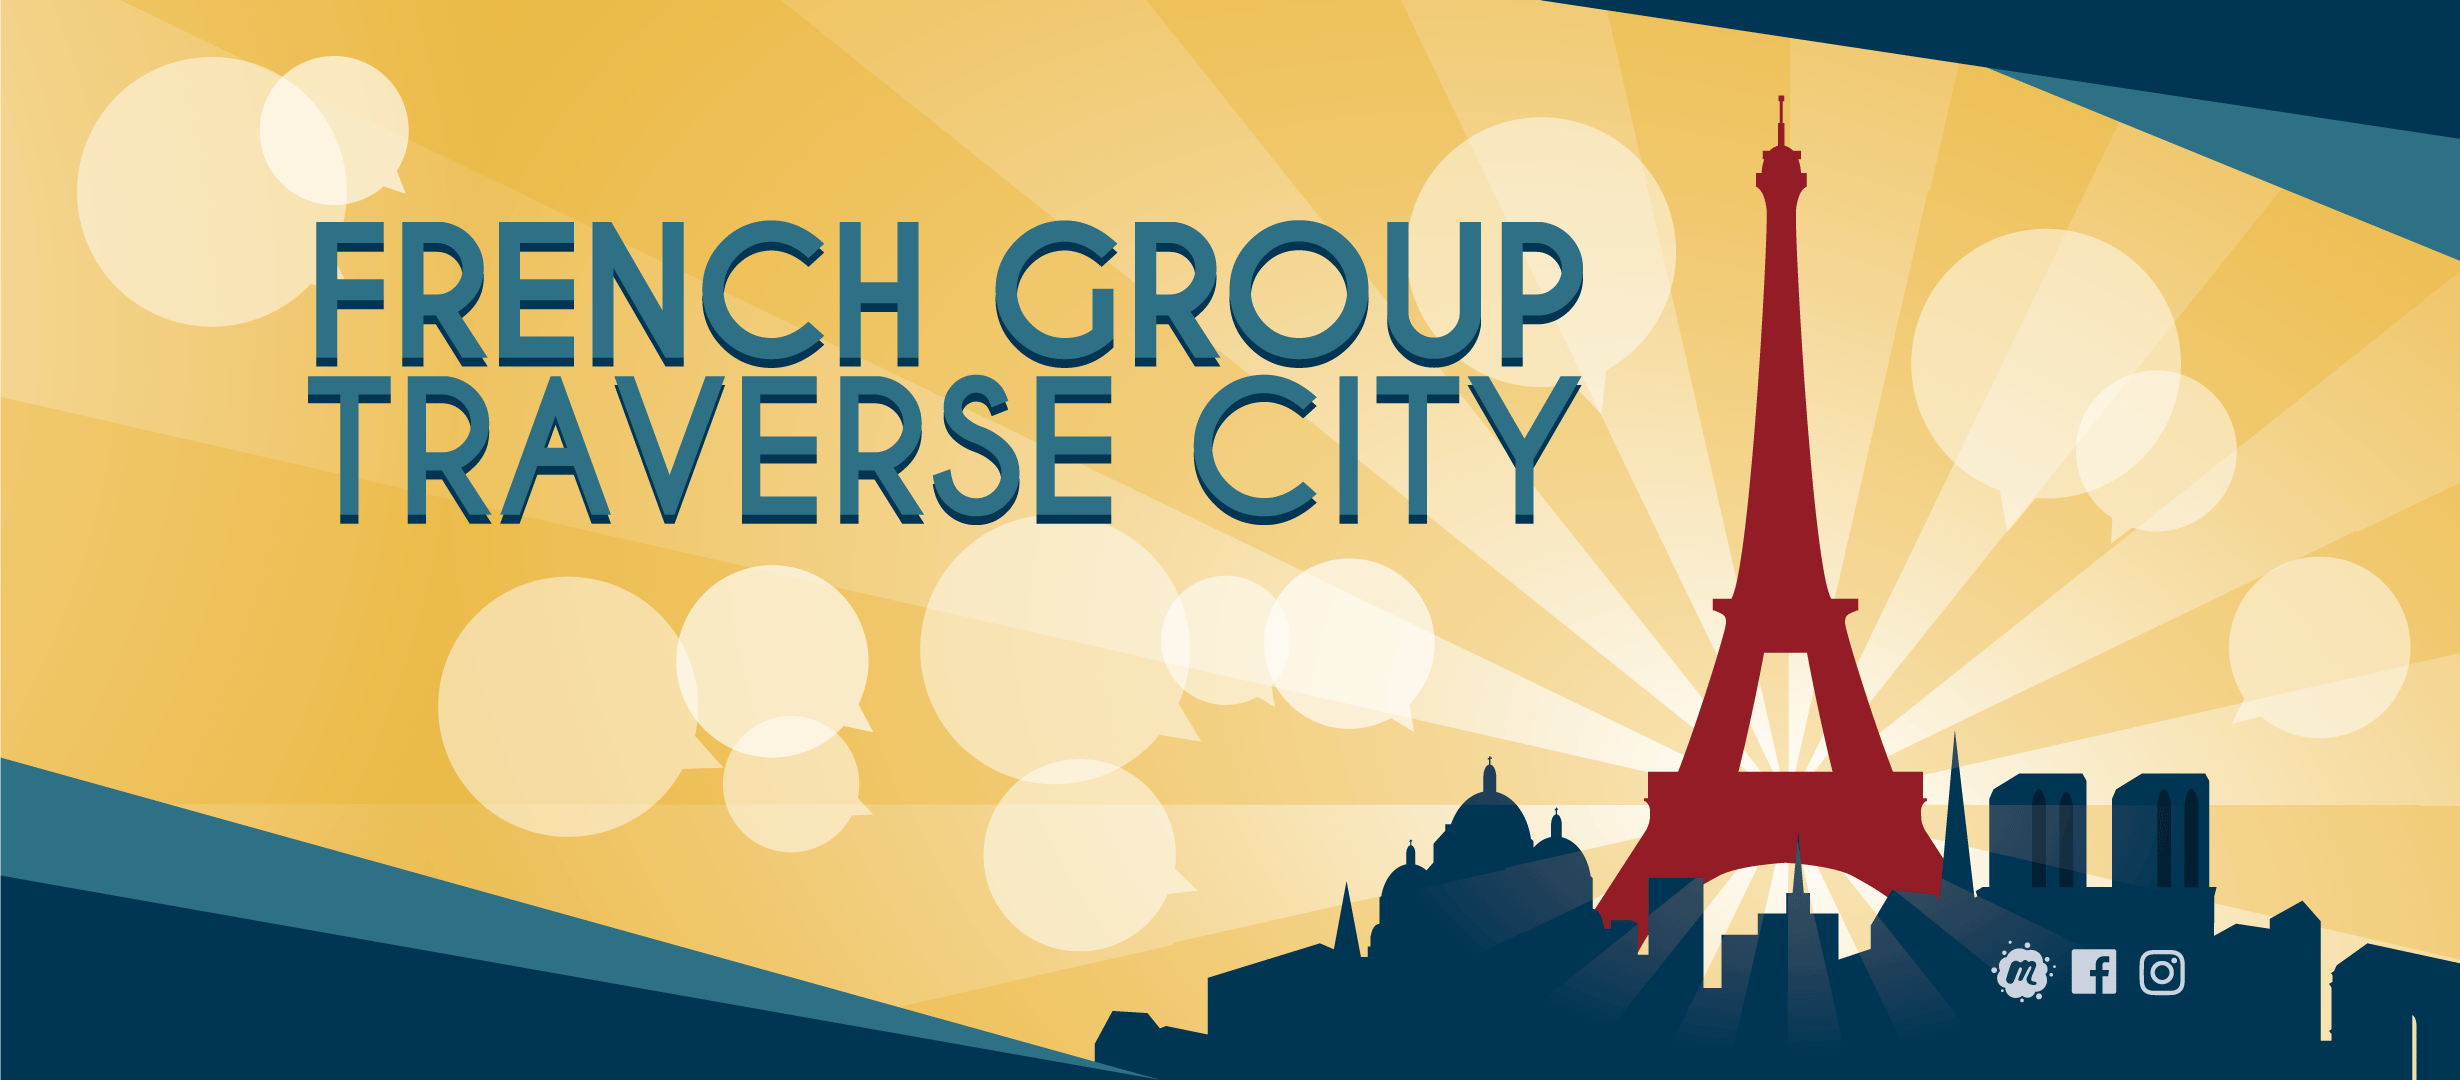 FrenchGroupTC_FacebookCover.png